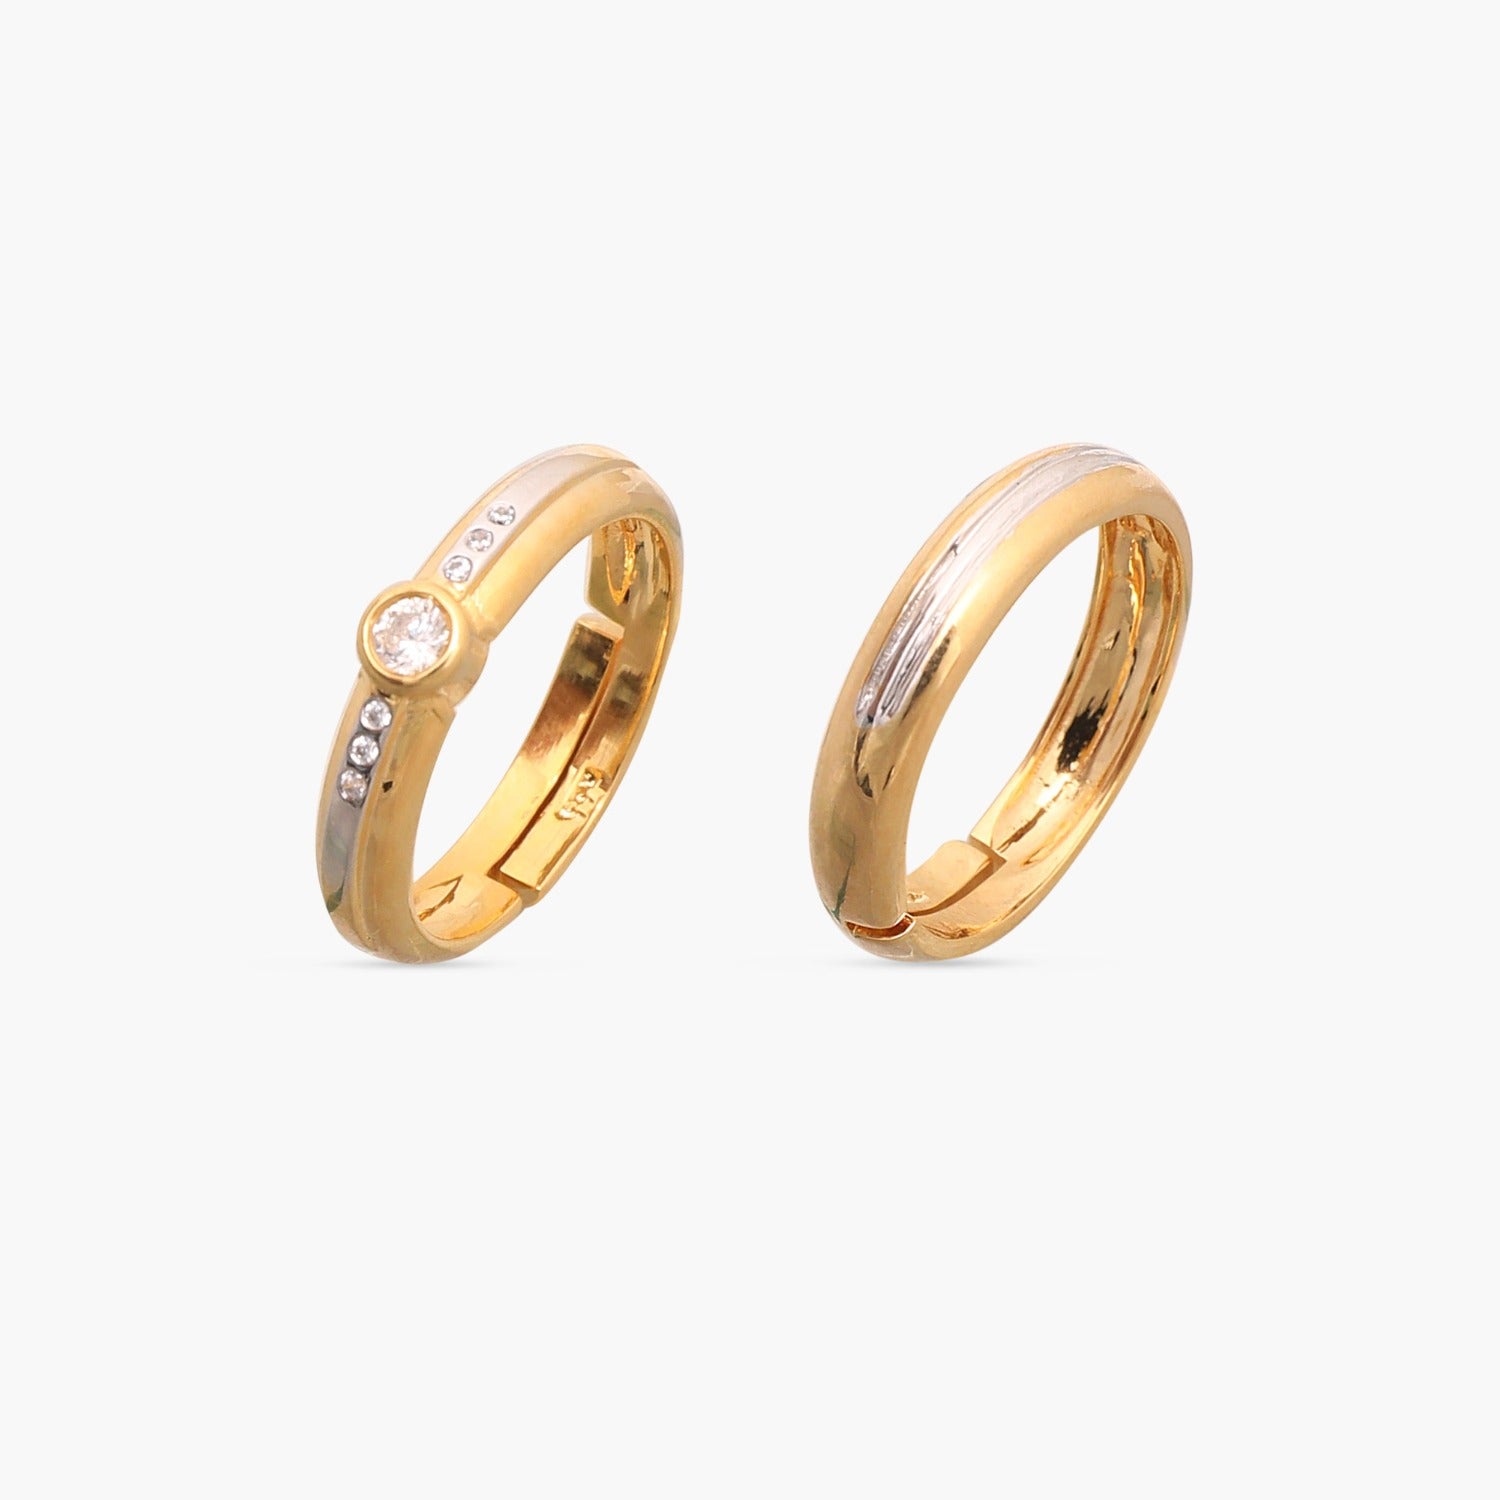 Stylish 612 Titanium Steel Gold Couple Rings Amazon With Frosted Pattern  Perfect For Weddings, Engagements, And Gifts 6mm Width Fast Drop Delivery  OT2C7 From Carshop2006, $0.7 | DHgate.Com